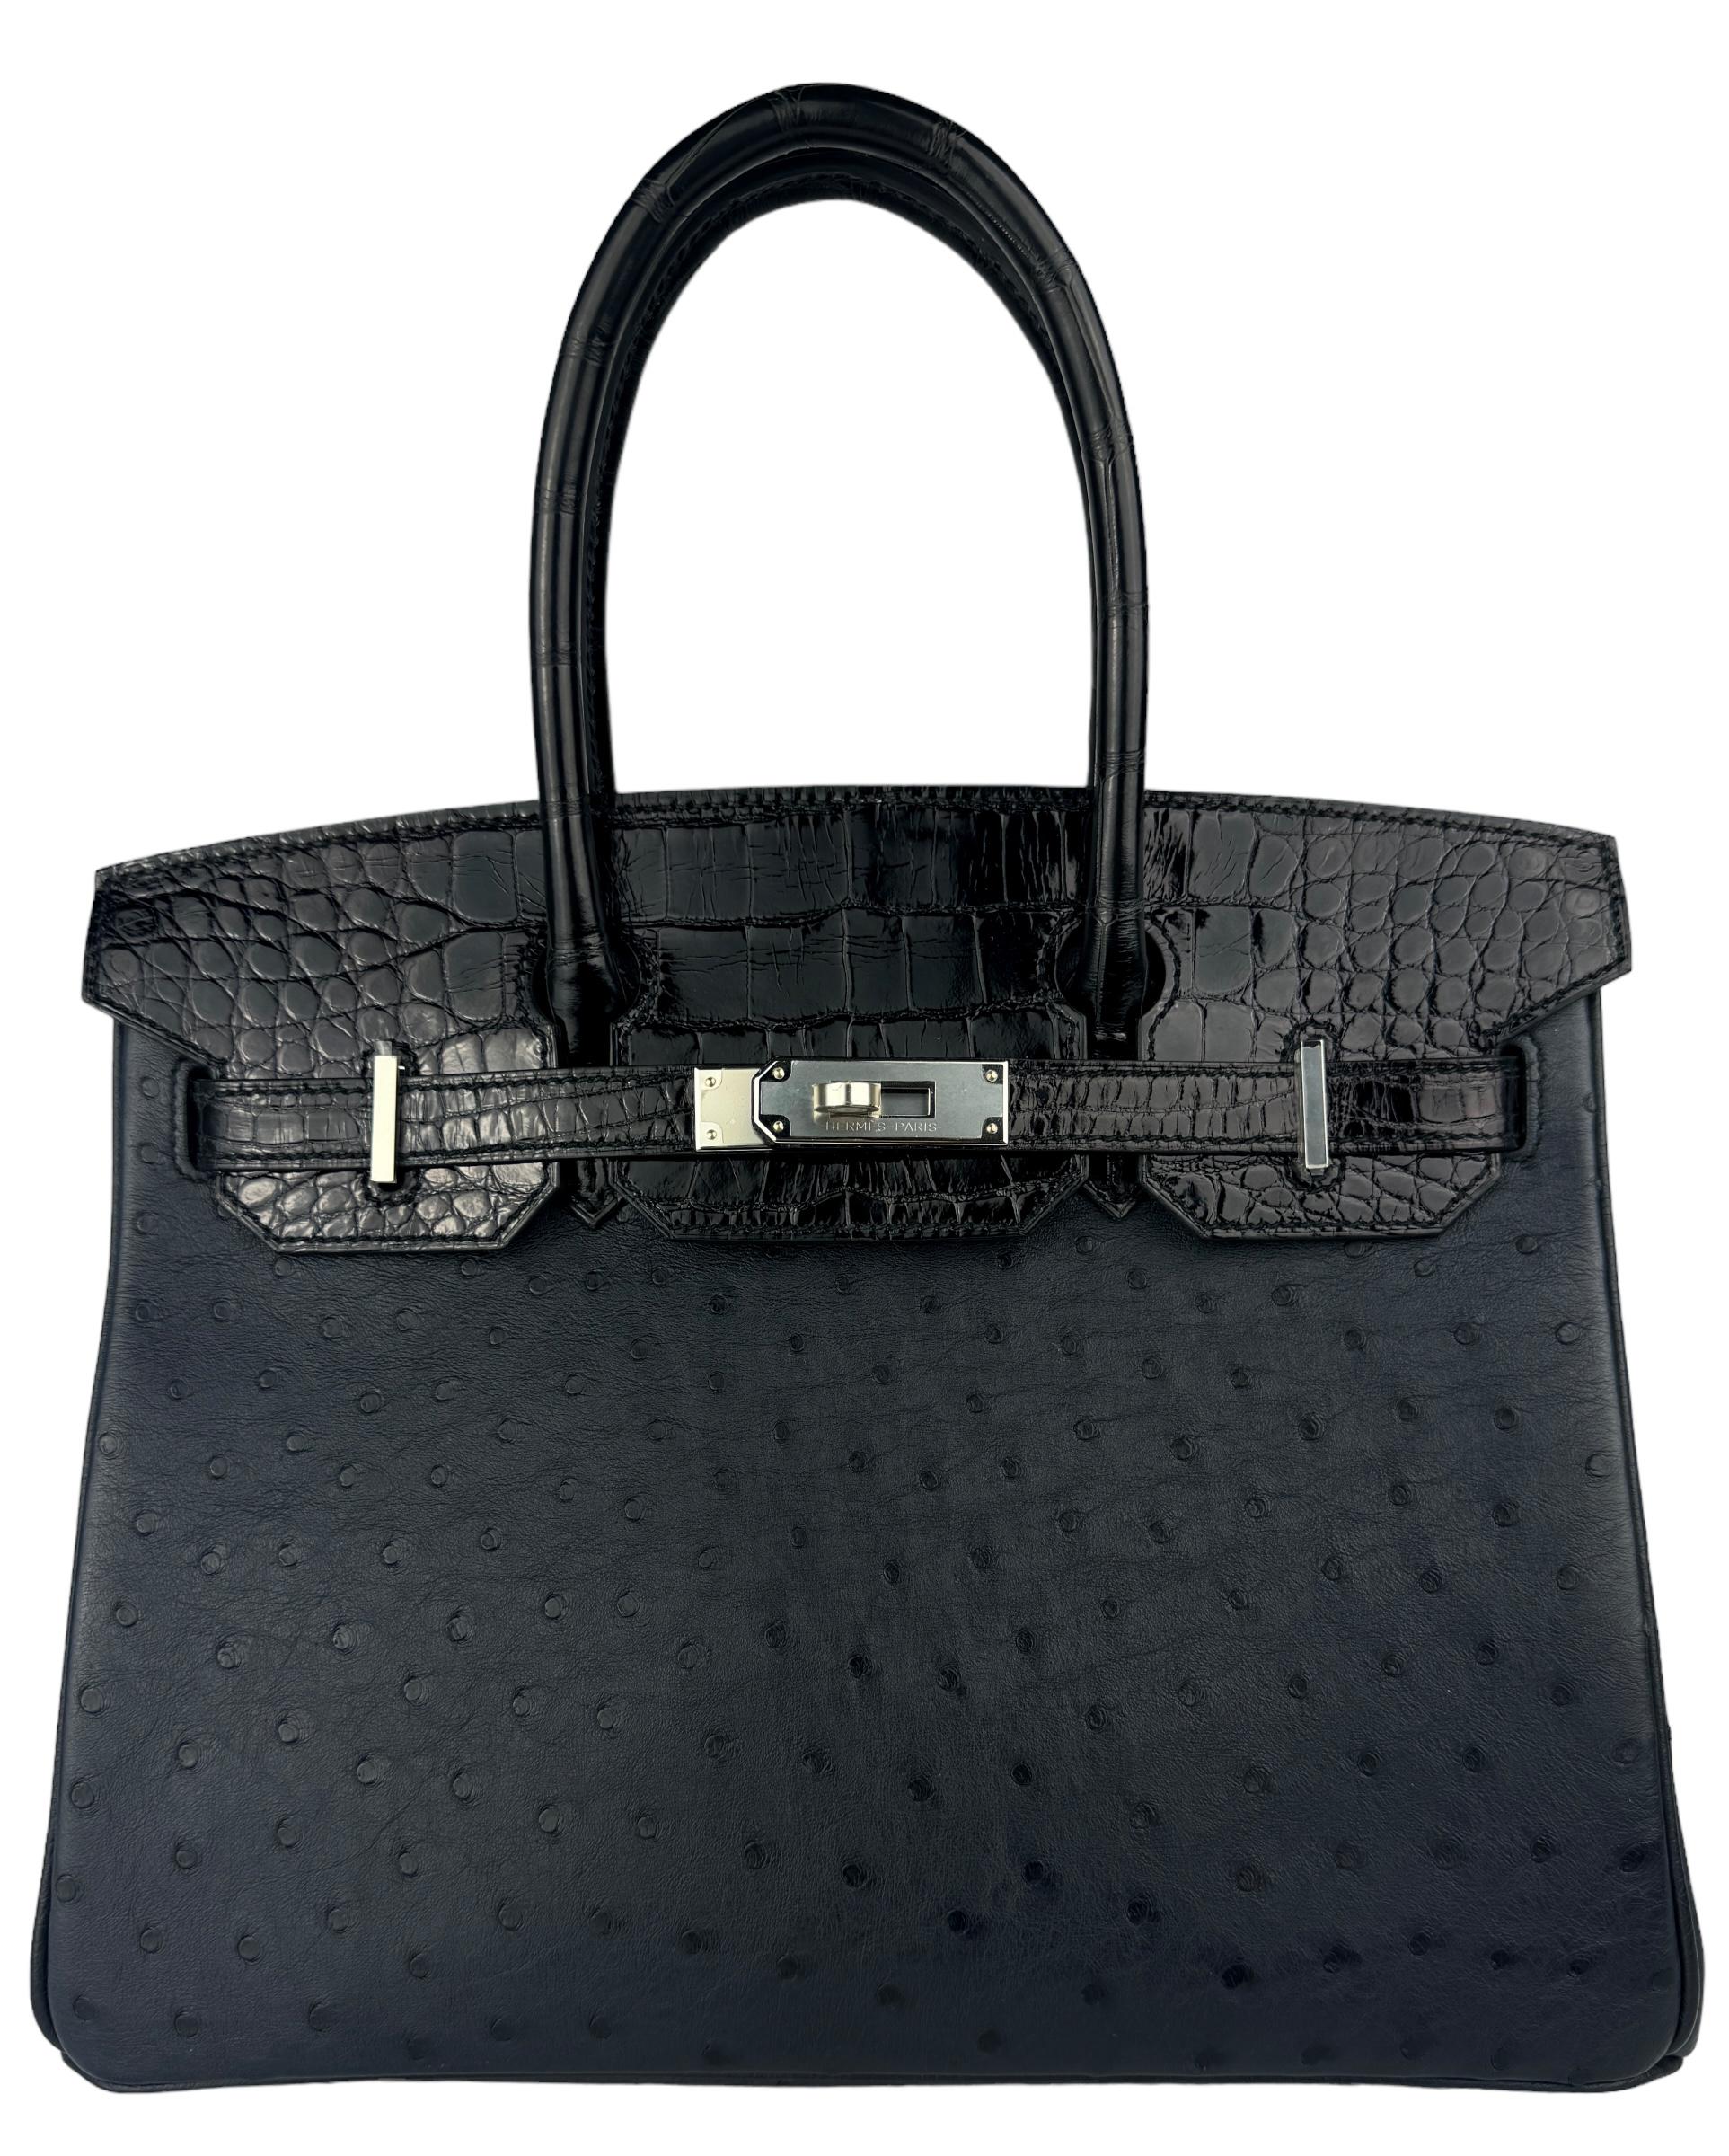 Absolutely Stunning Rare Limited Edition As New Hermes Birkin 30 Touch Blue Indigo Ostrich and Black Crocodile Leather. Complimented by Palladium Hardware. Y Stamp 2021 includes all Accessories and Box.

Shop with Confidence from Lux Addicts.